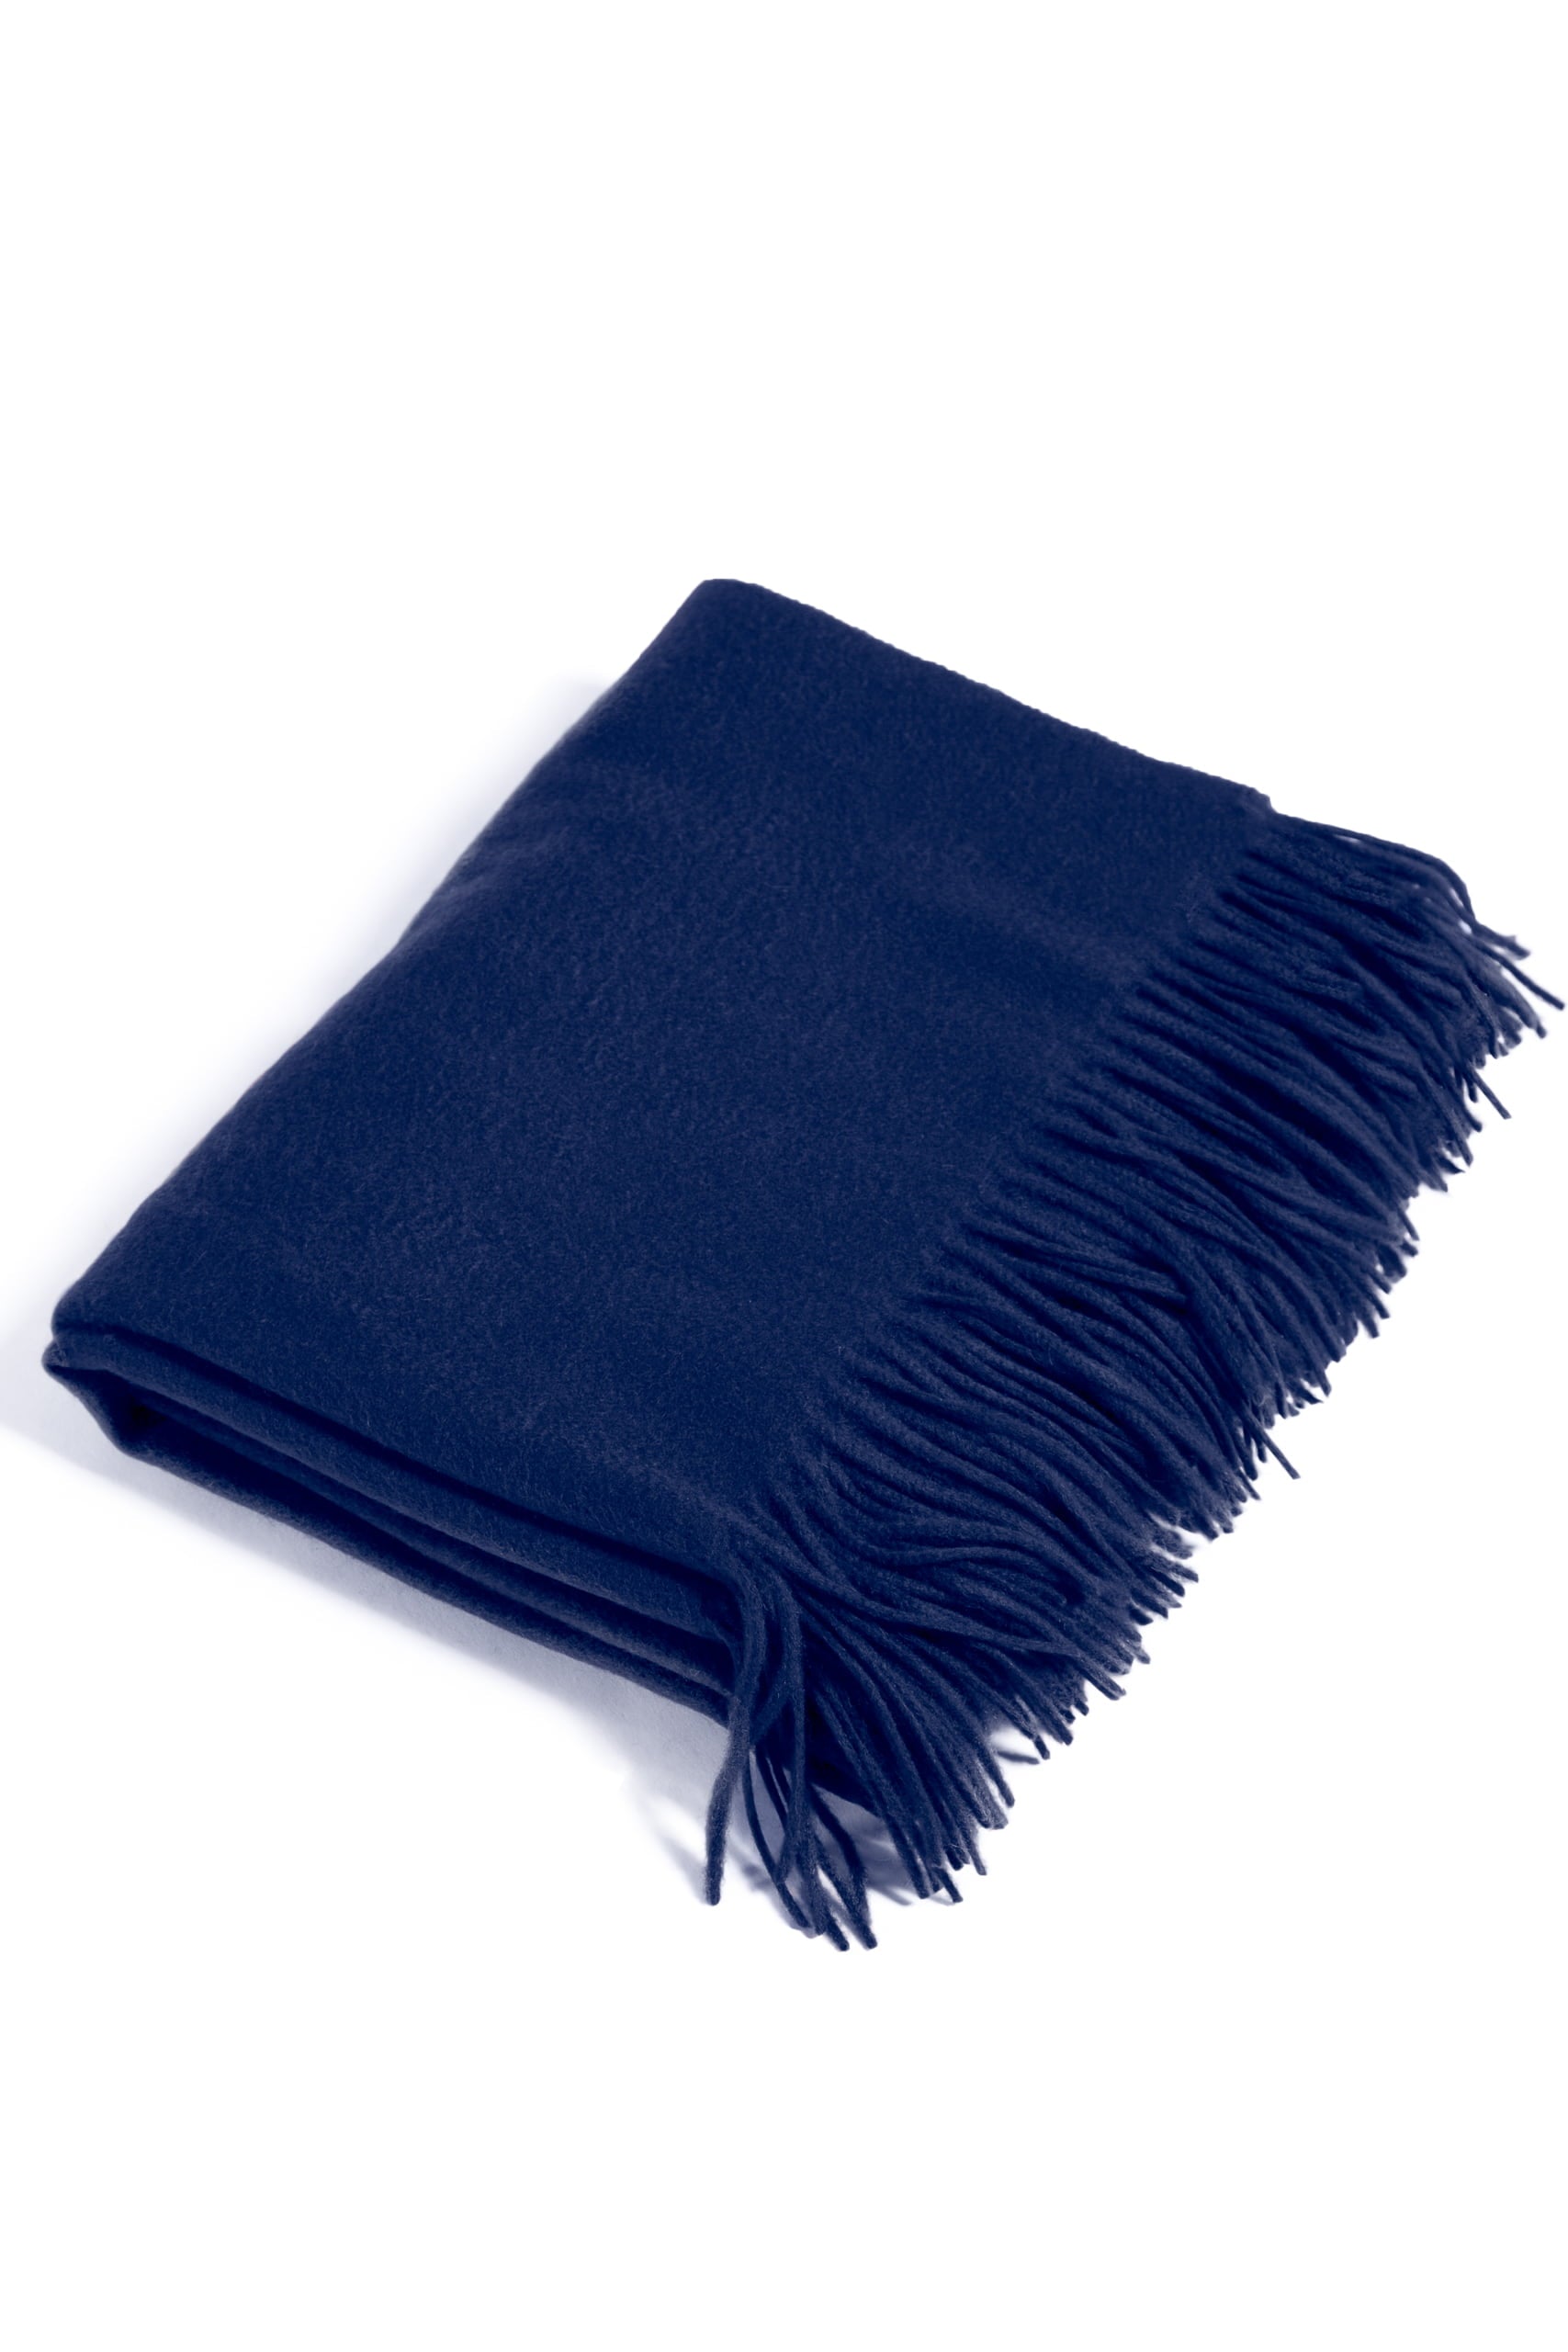 100% Pure Cashmere Fringe Throw Blanket with Gift Box Home>Bedding>Throw Fishers Finery Navy 